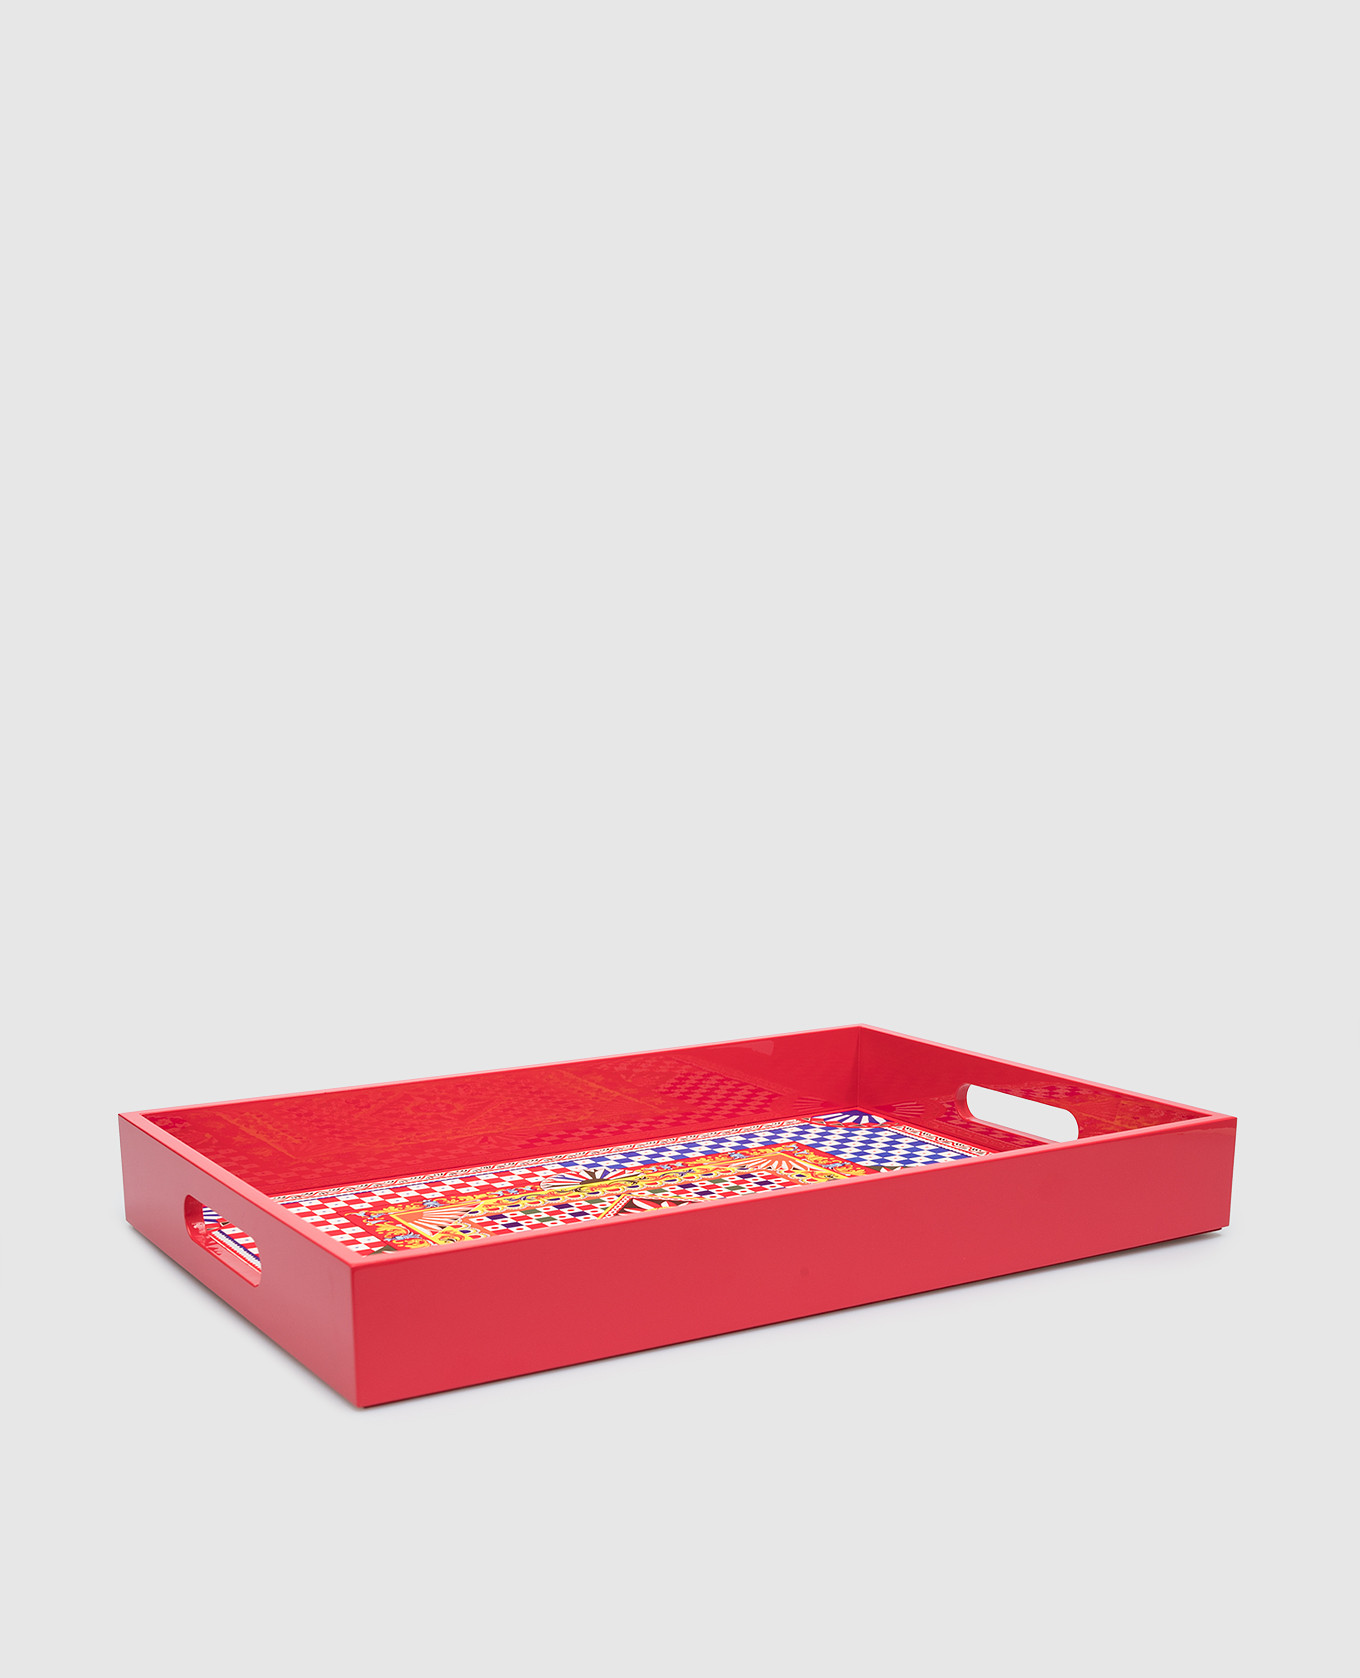 Red wooden tray with a geometric print